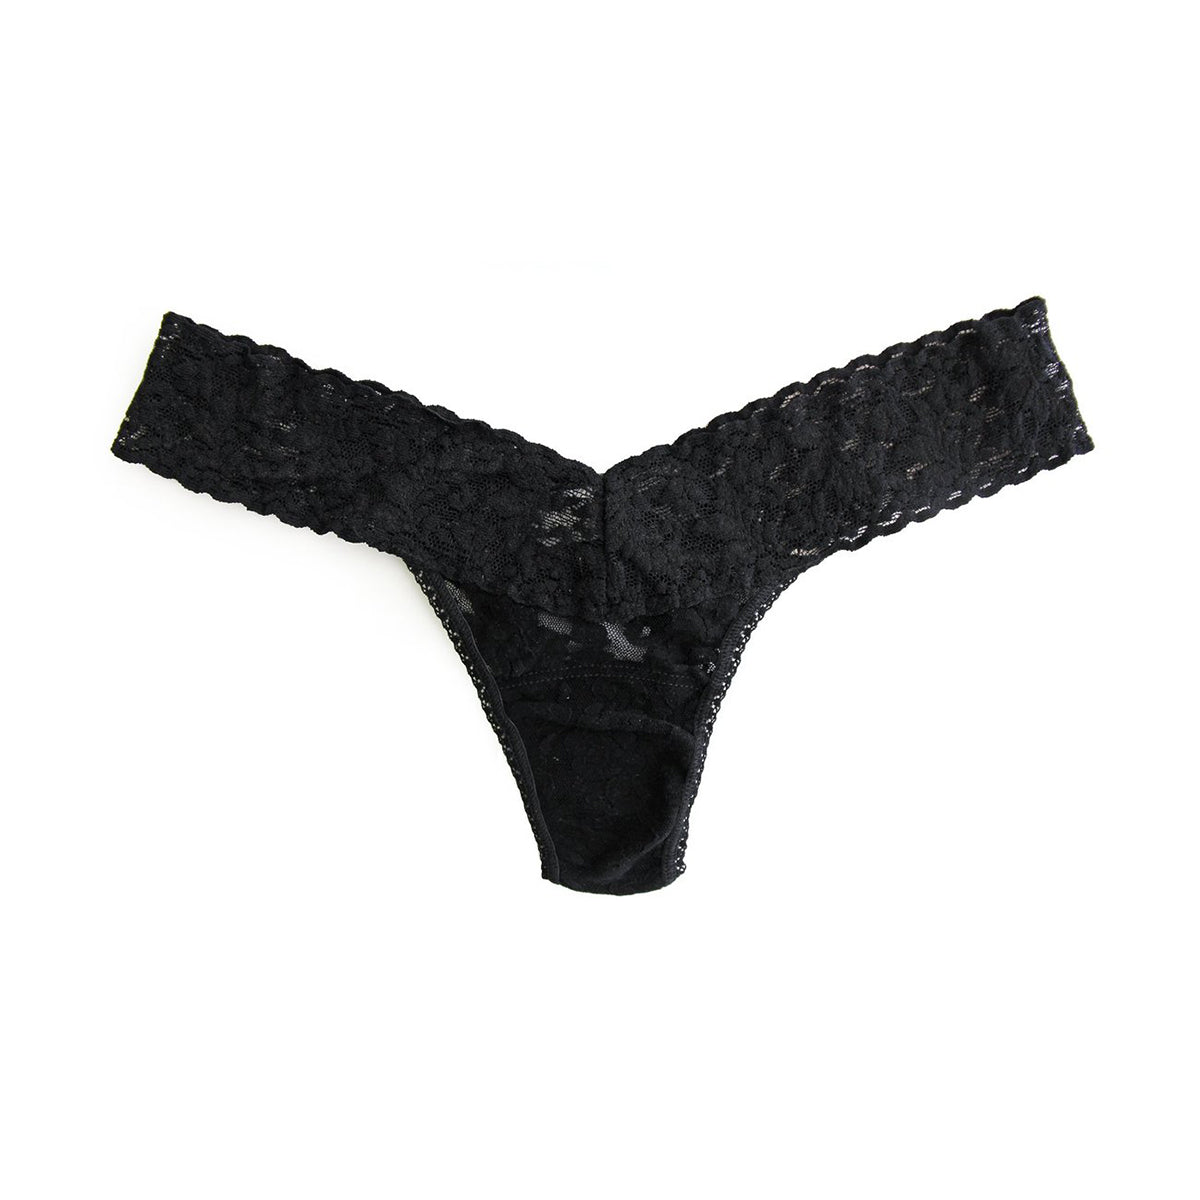 Hanky Panky Lace thong in black lace panty lingerie canada linea intima toronto low rise thong